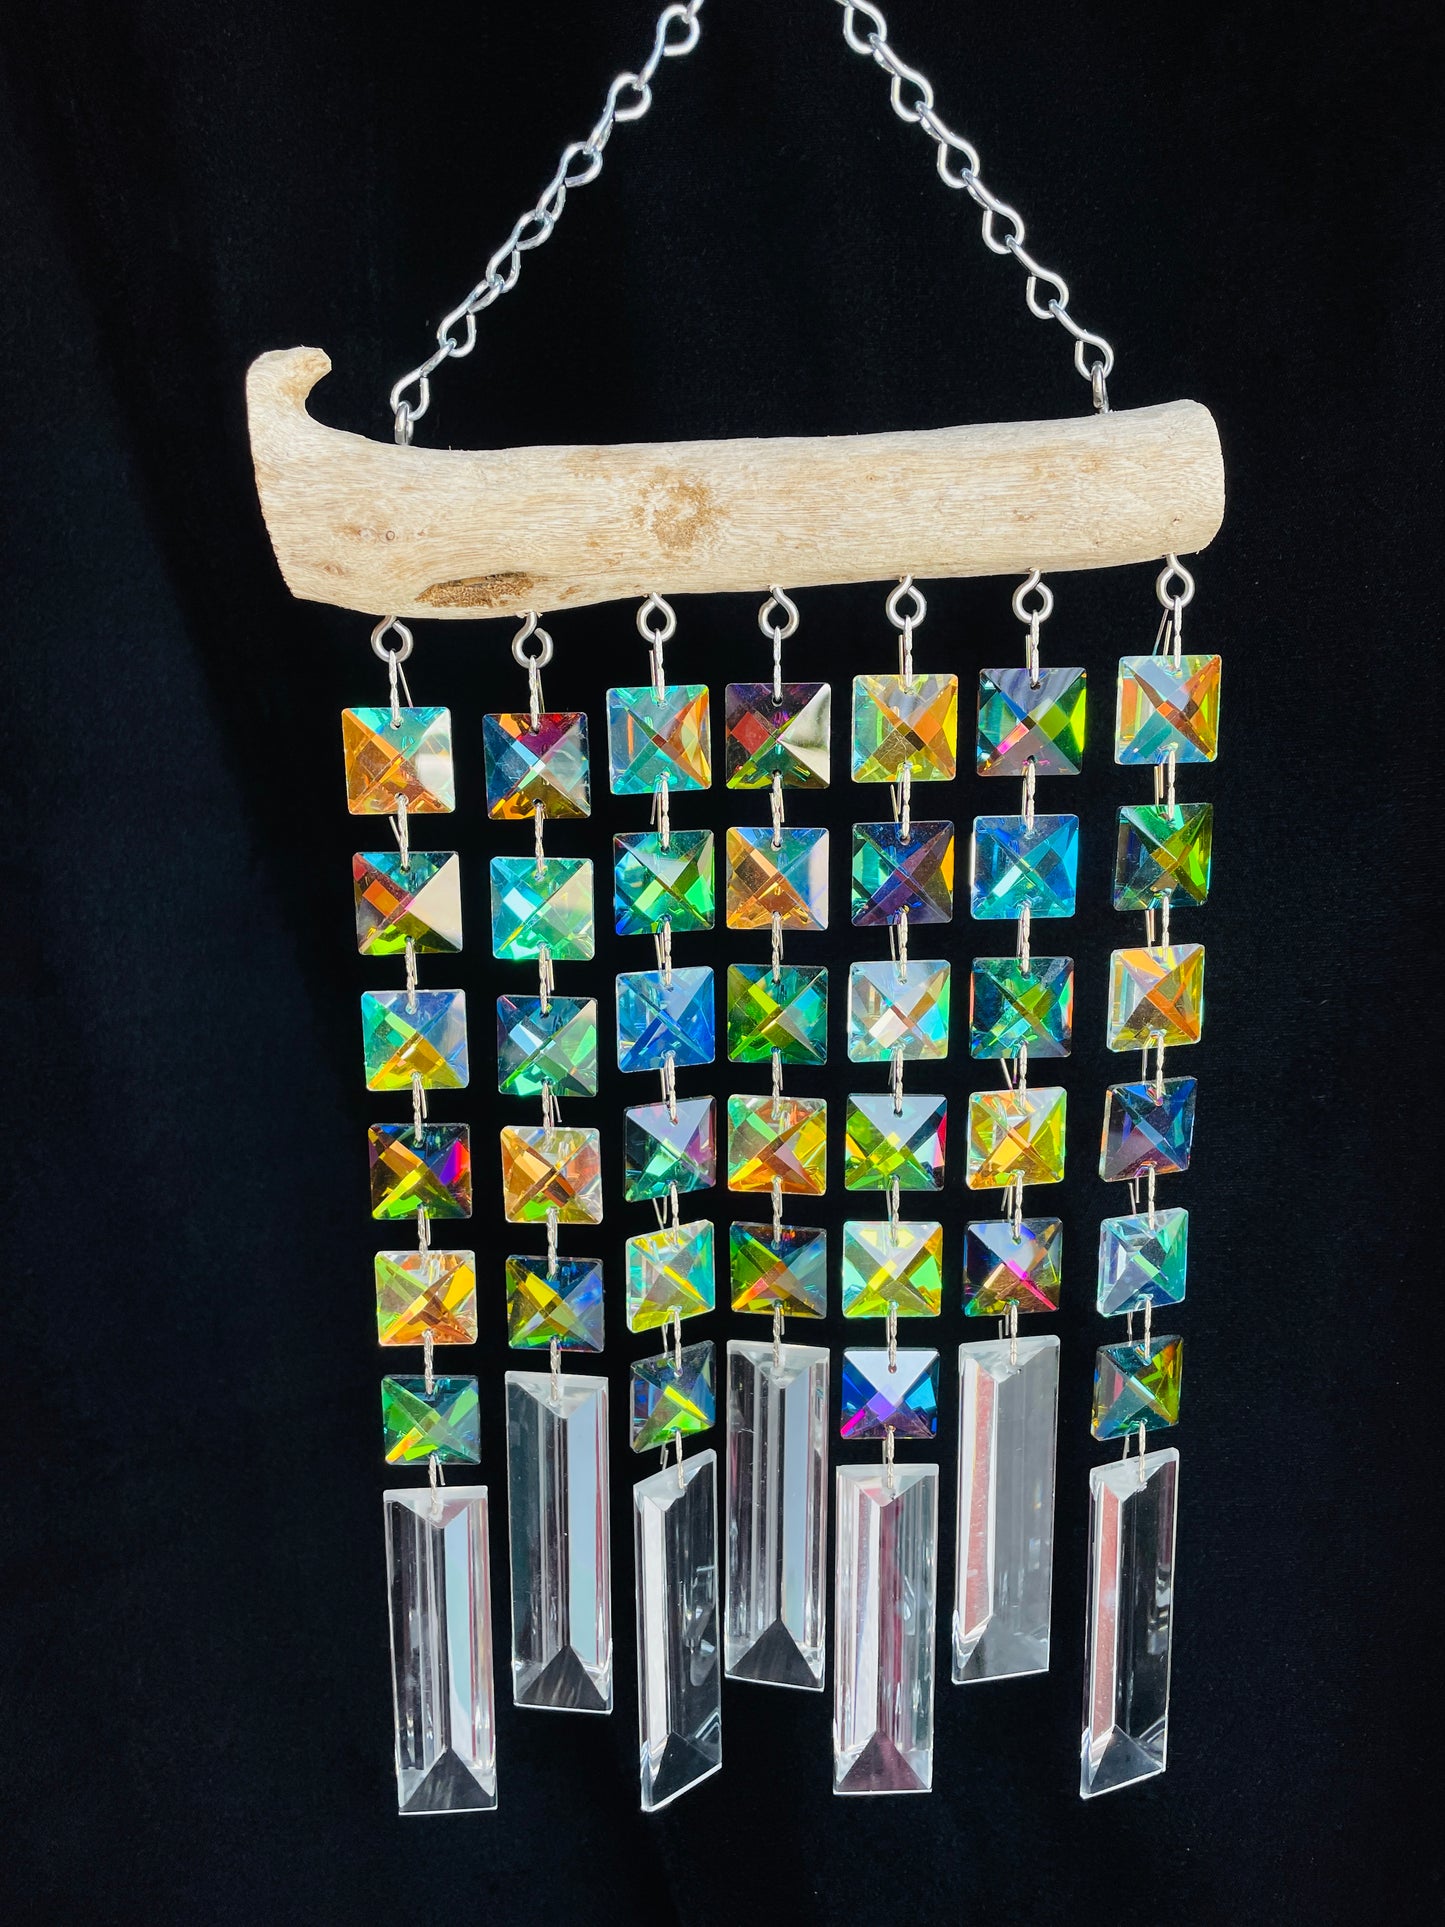 Unique handmade chandler crystal art by Dazzling Driftwood